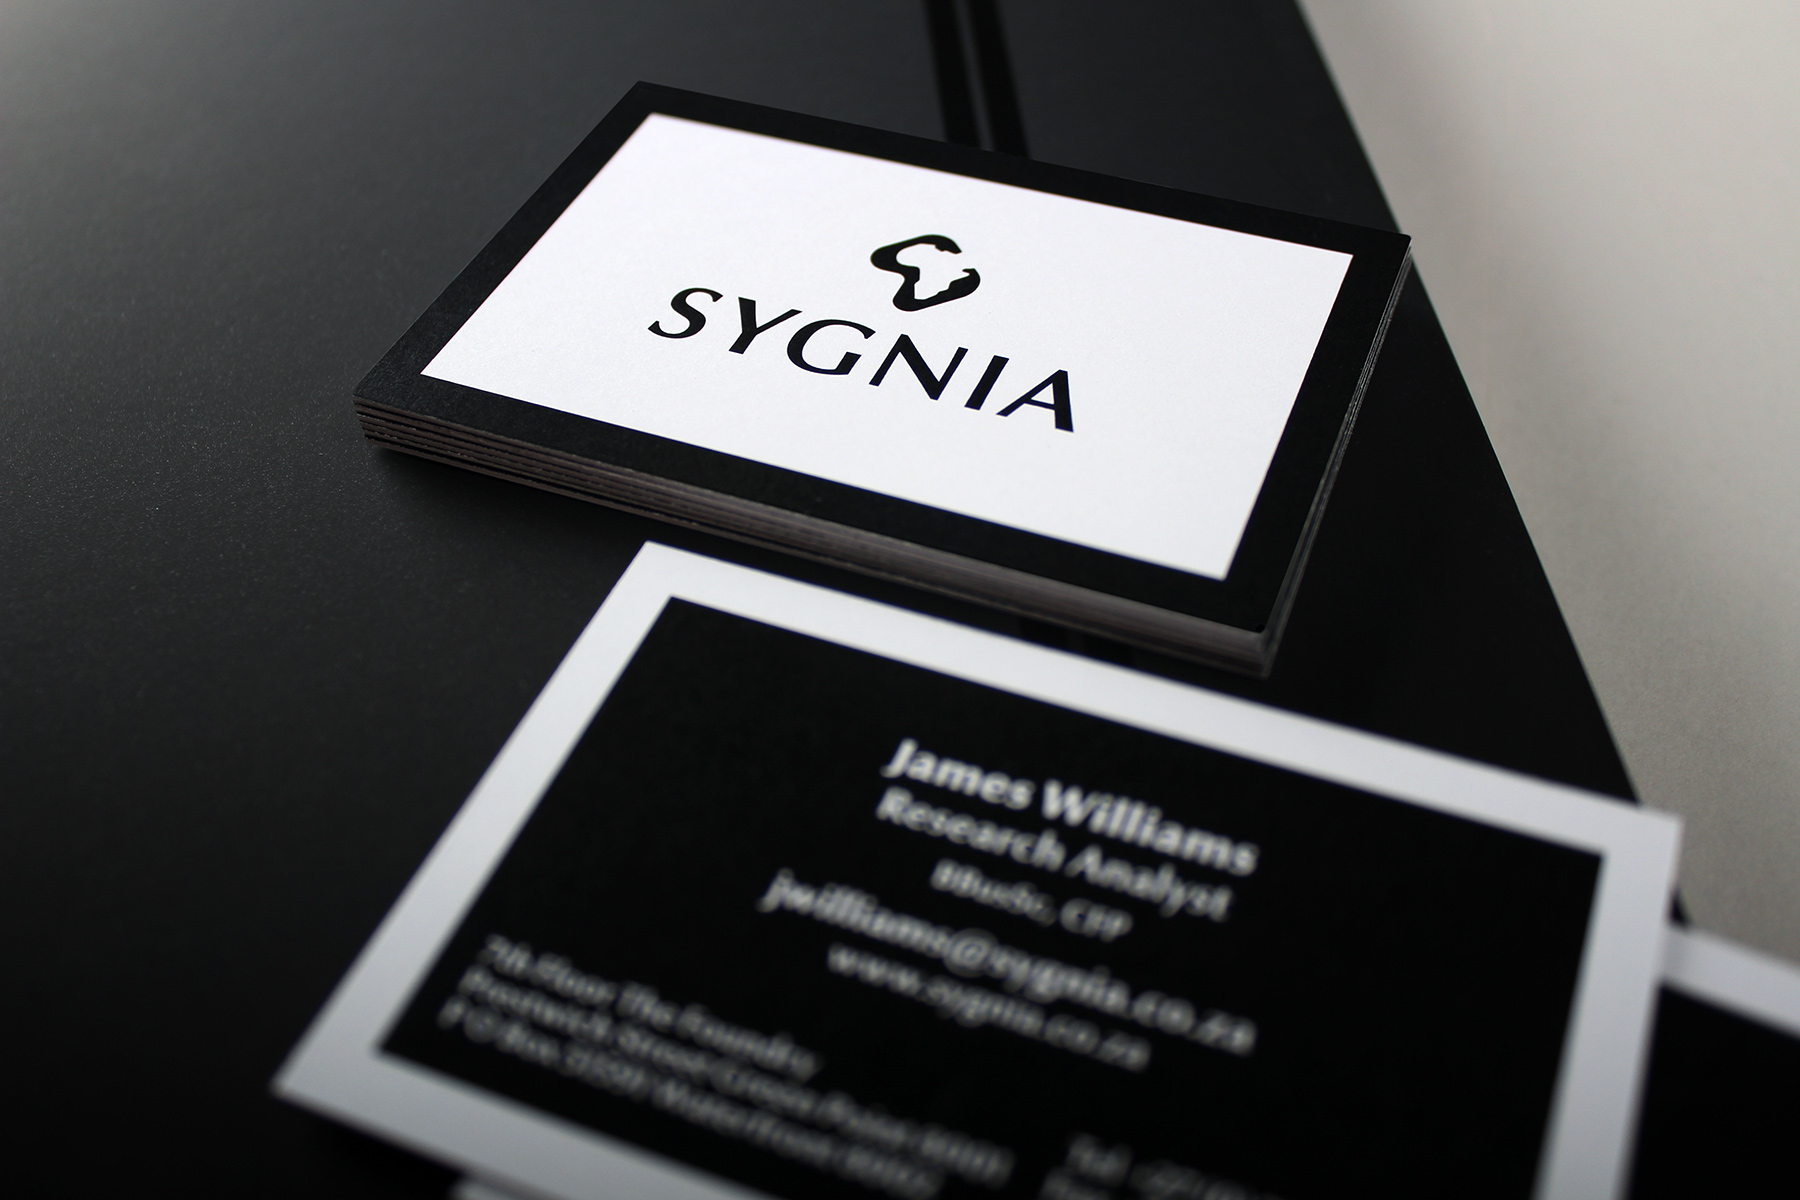 At a high level, the corporate identity reverts to a more minimal feel, with an emphasis on quality print and materials.